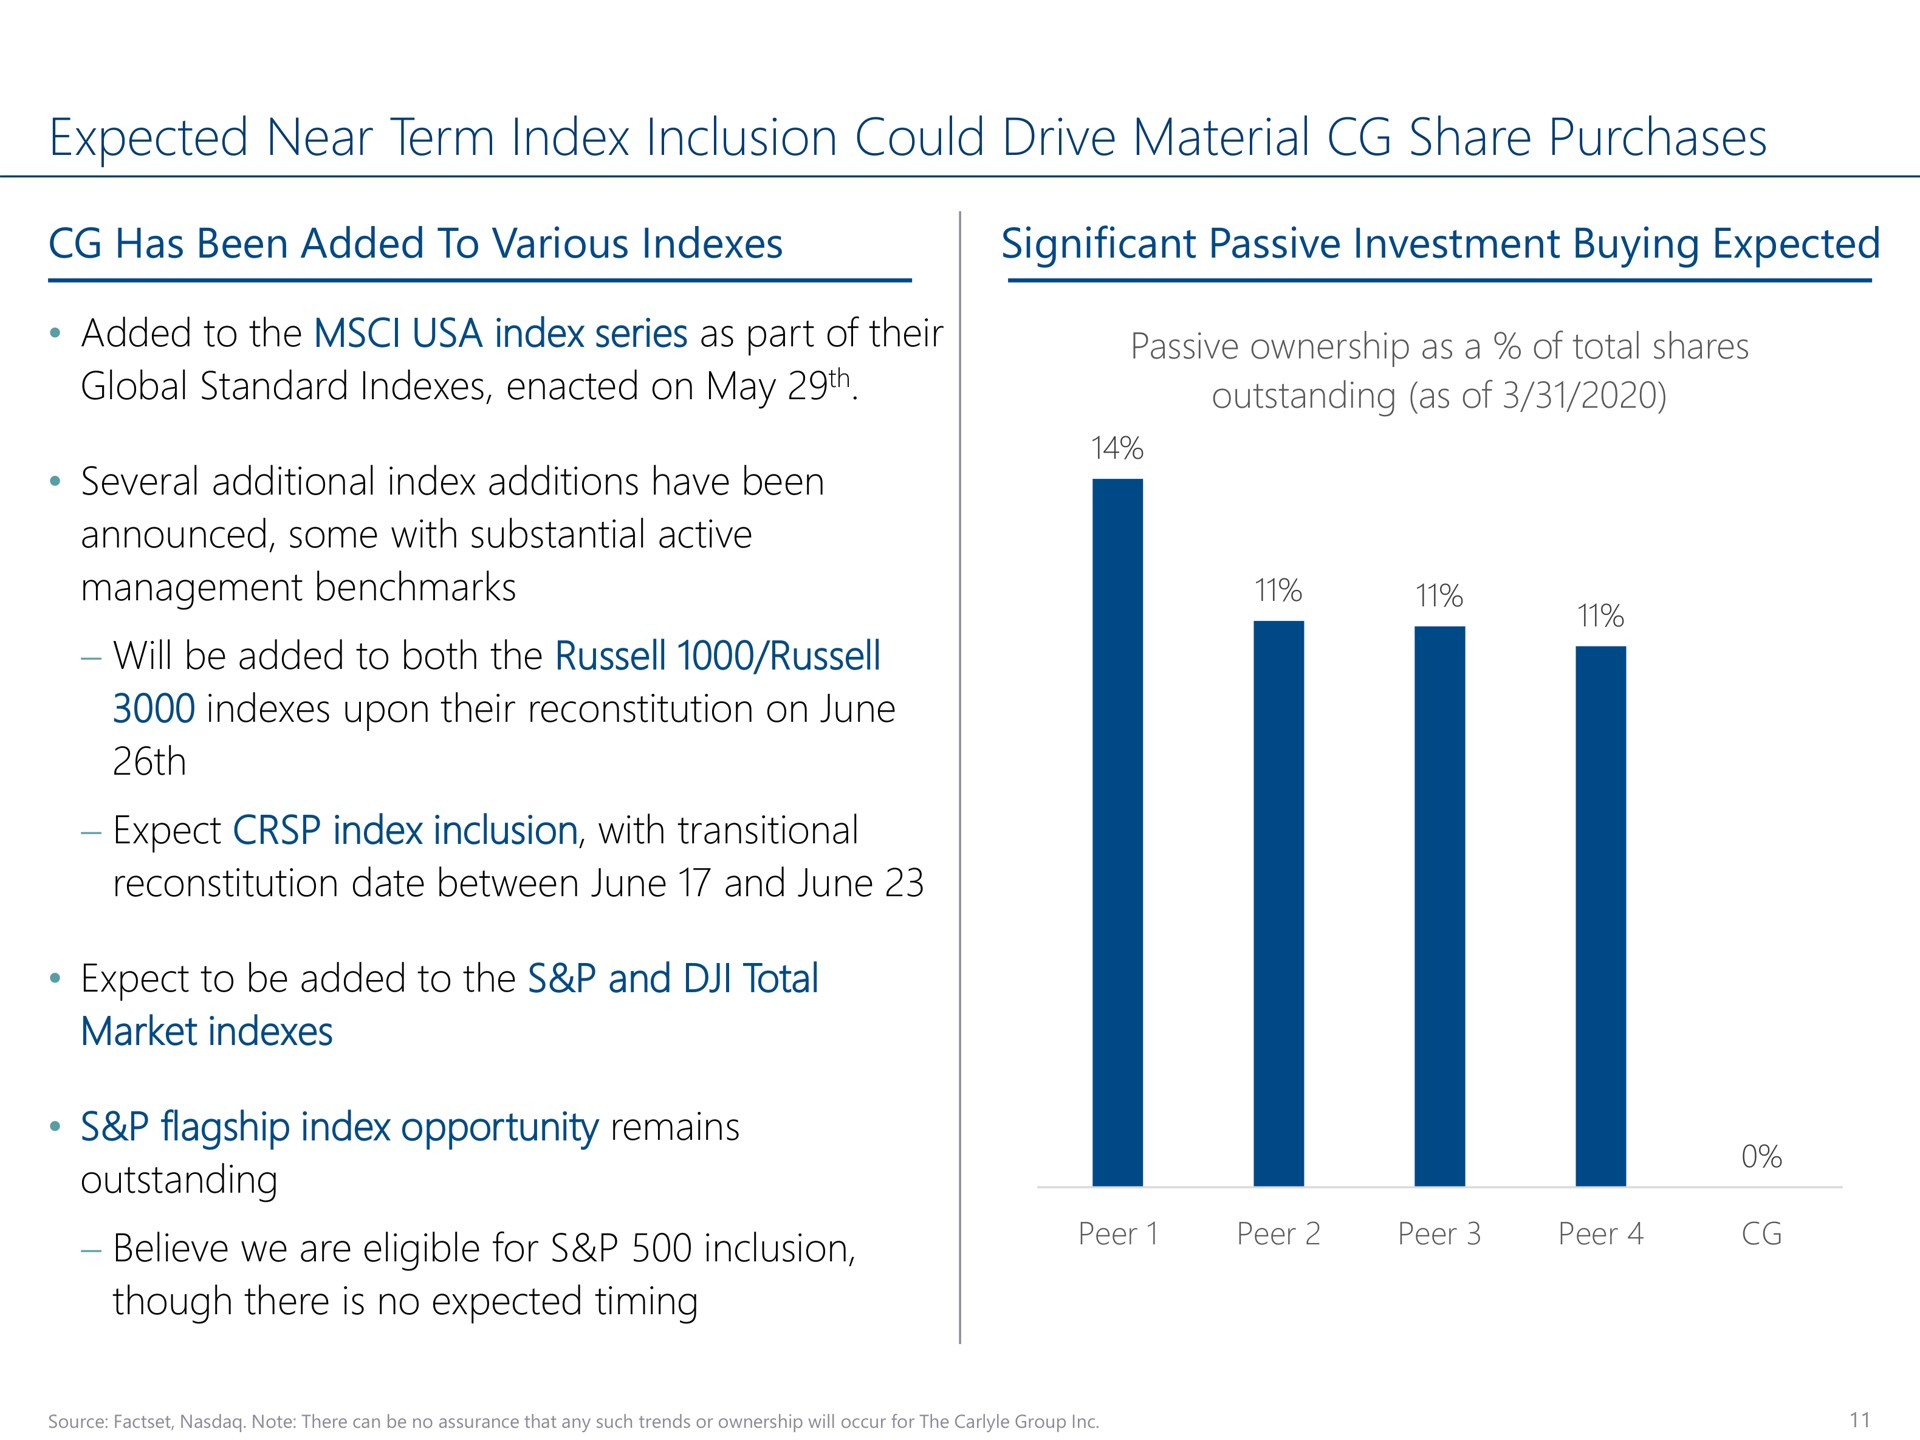 expected near term index inclusion could drive material share purchases has been added to various indexes significant passive investment buying expected | Carlyle